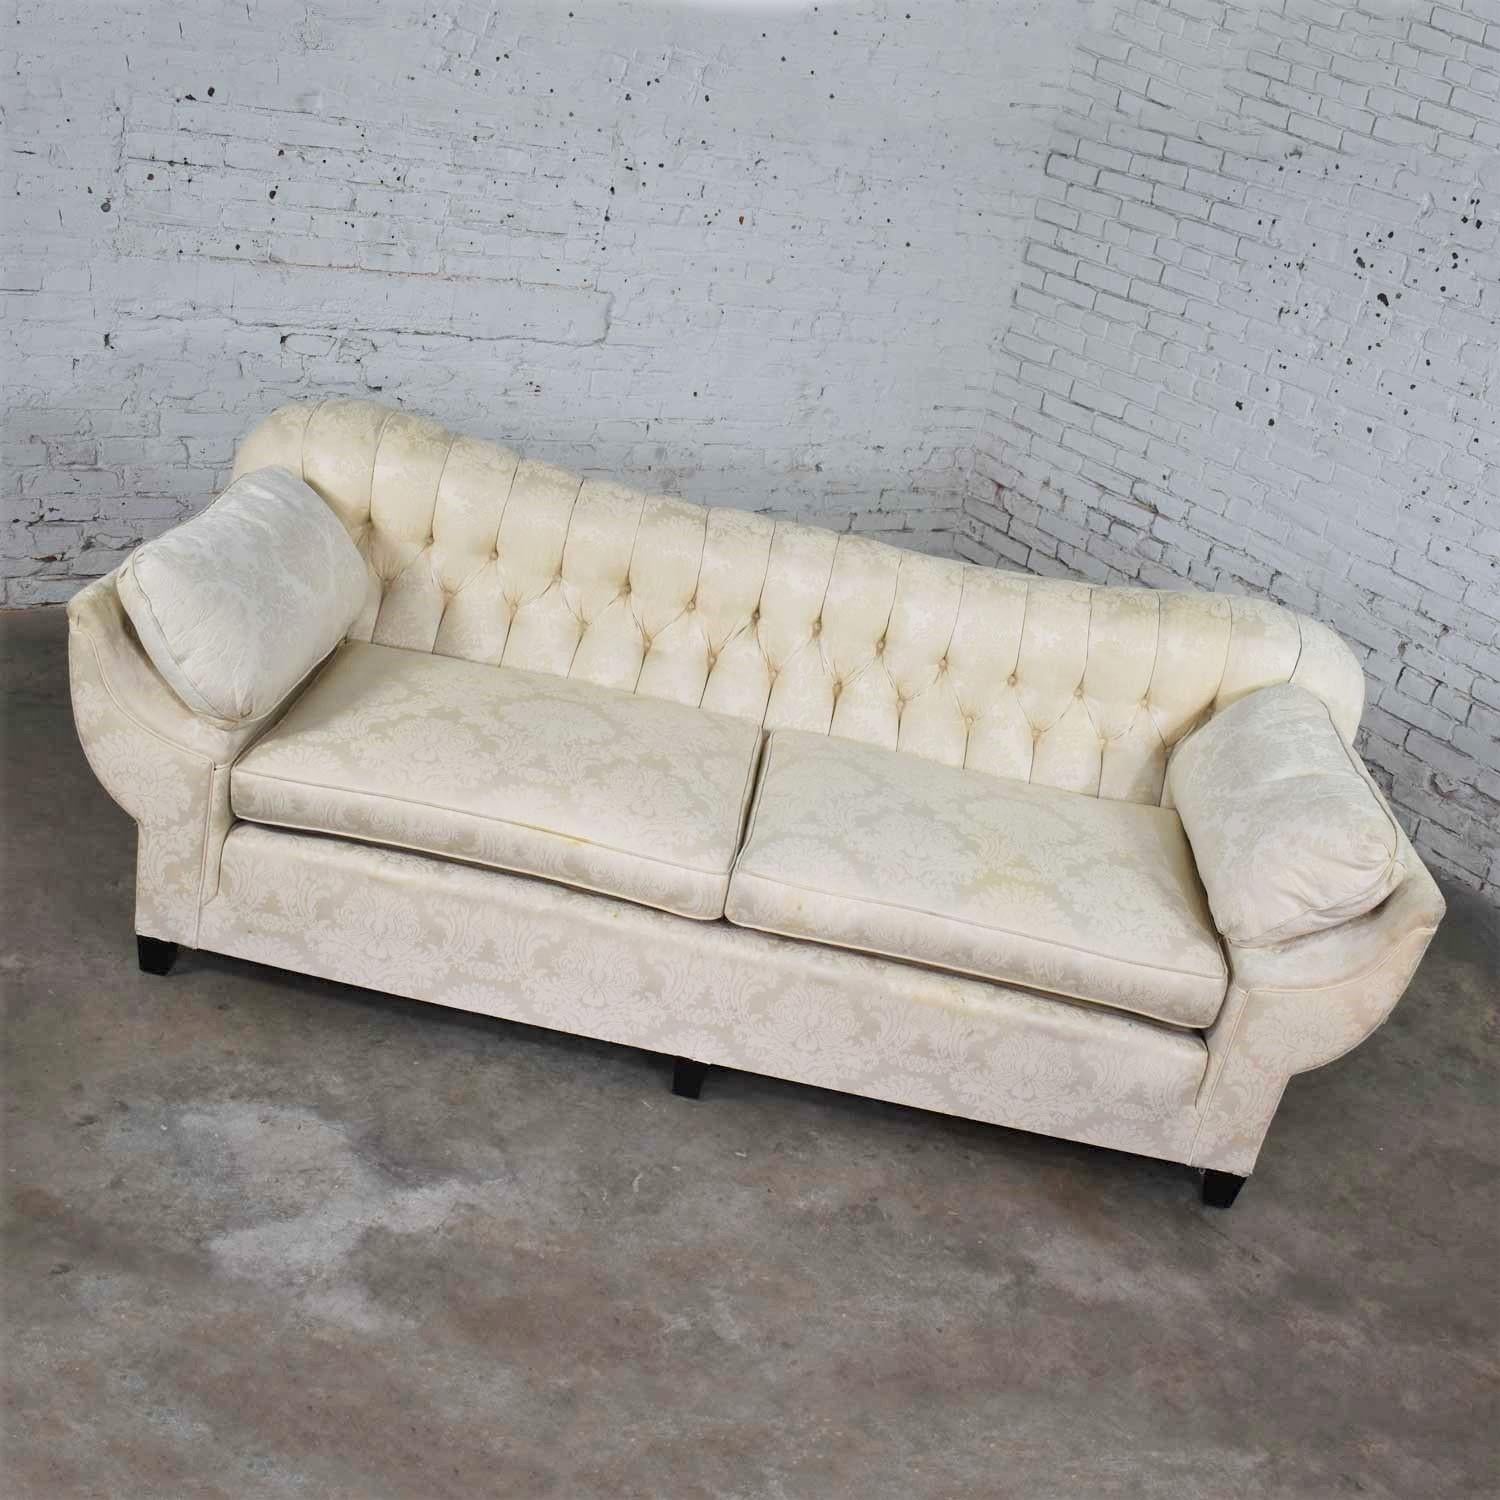 Vintage Art Deco Hollywood Regency Sofa Tufted Back and Concave Pillowed Arms For Sale 6